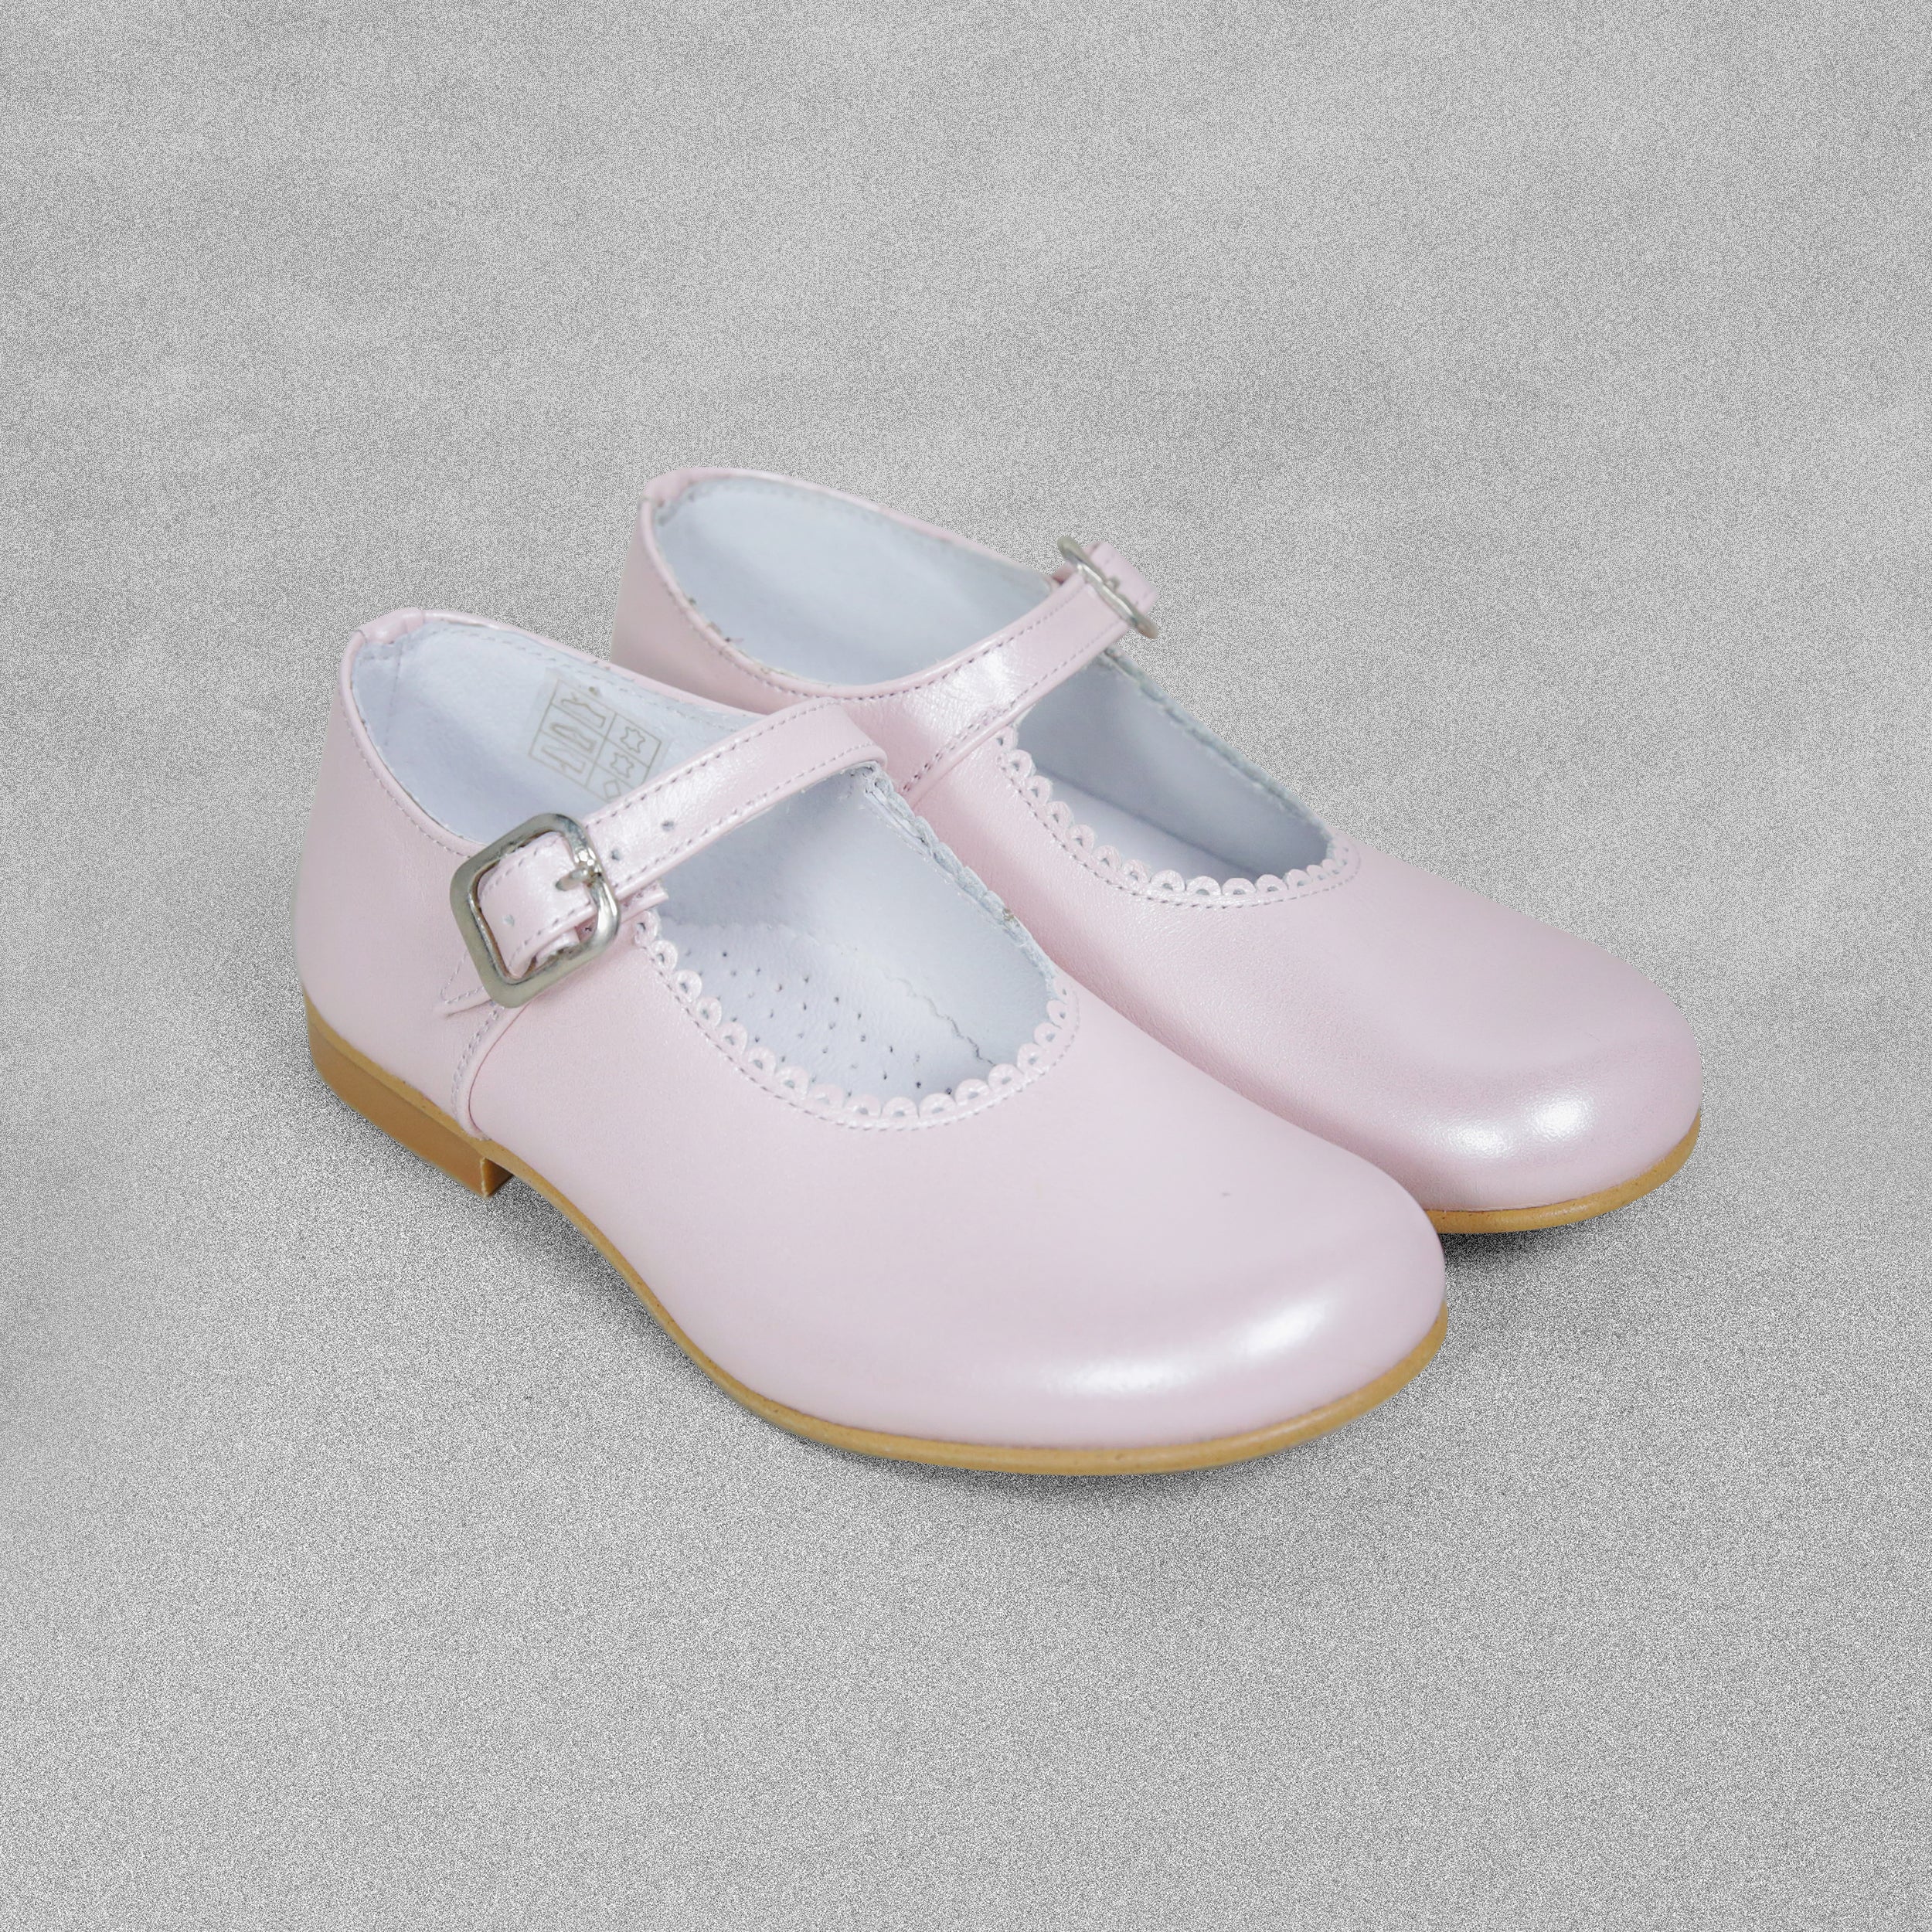 Shoeting Stars Pink Shoes with Buckle Strap